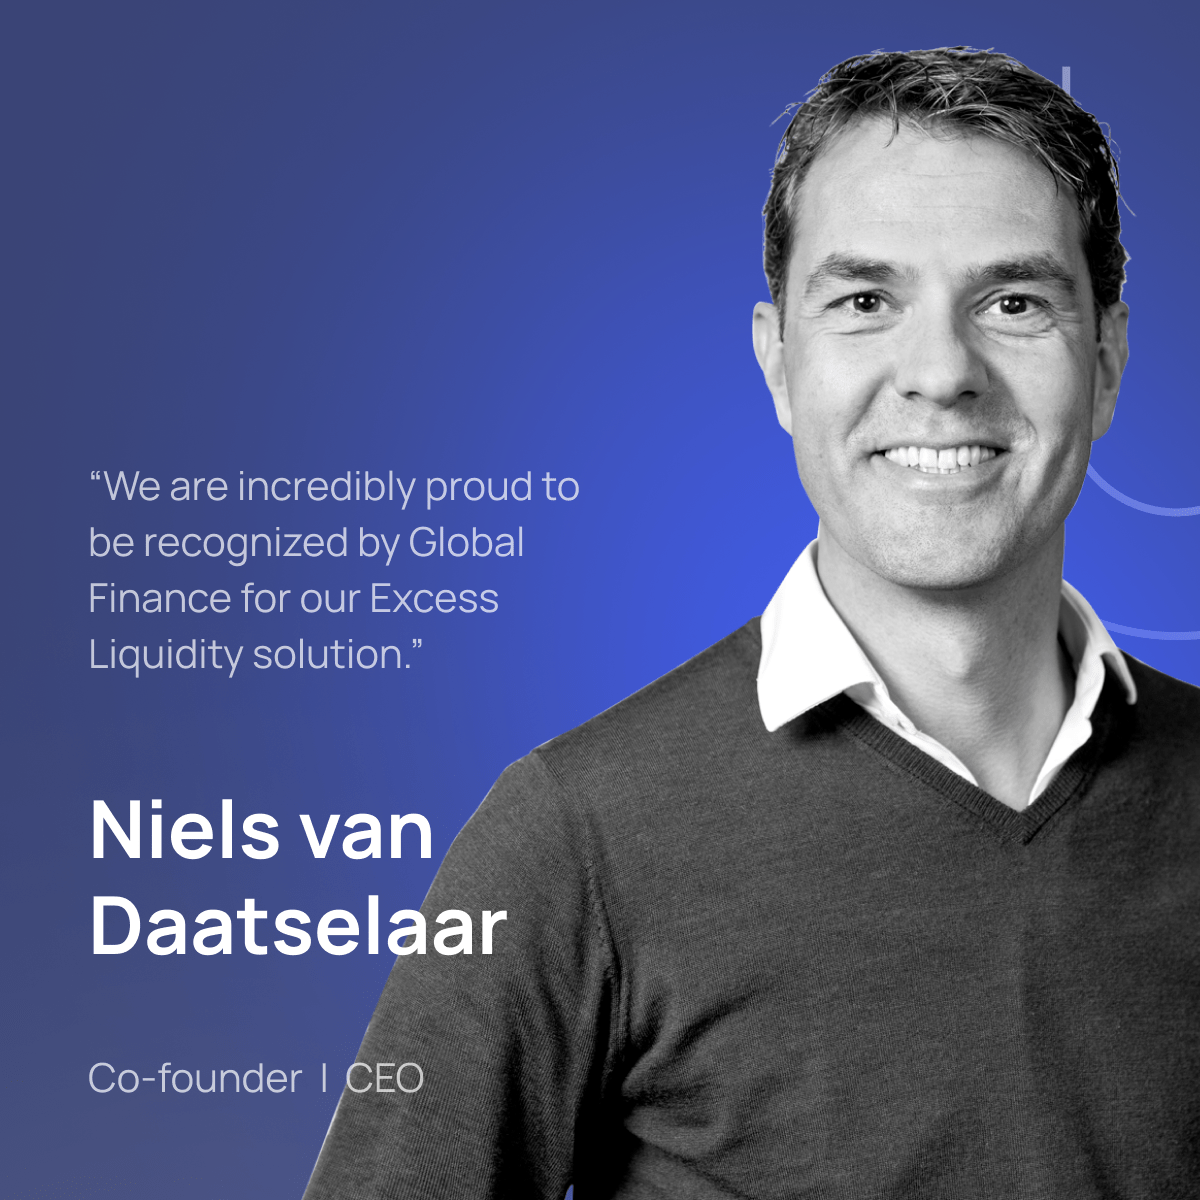 An image featuring a quote from Niels Van Daatselaar, CEO and co-founder of TreasurUp, regarding the excess liquidity award. 